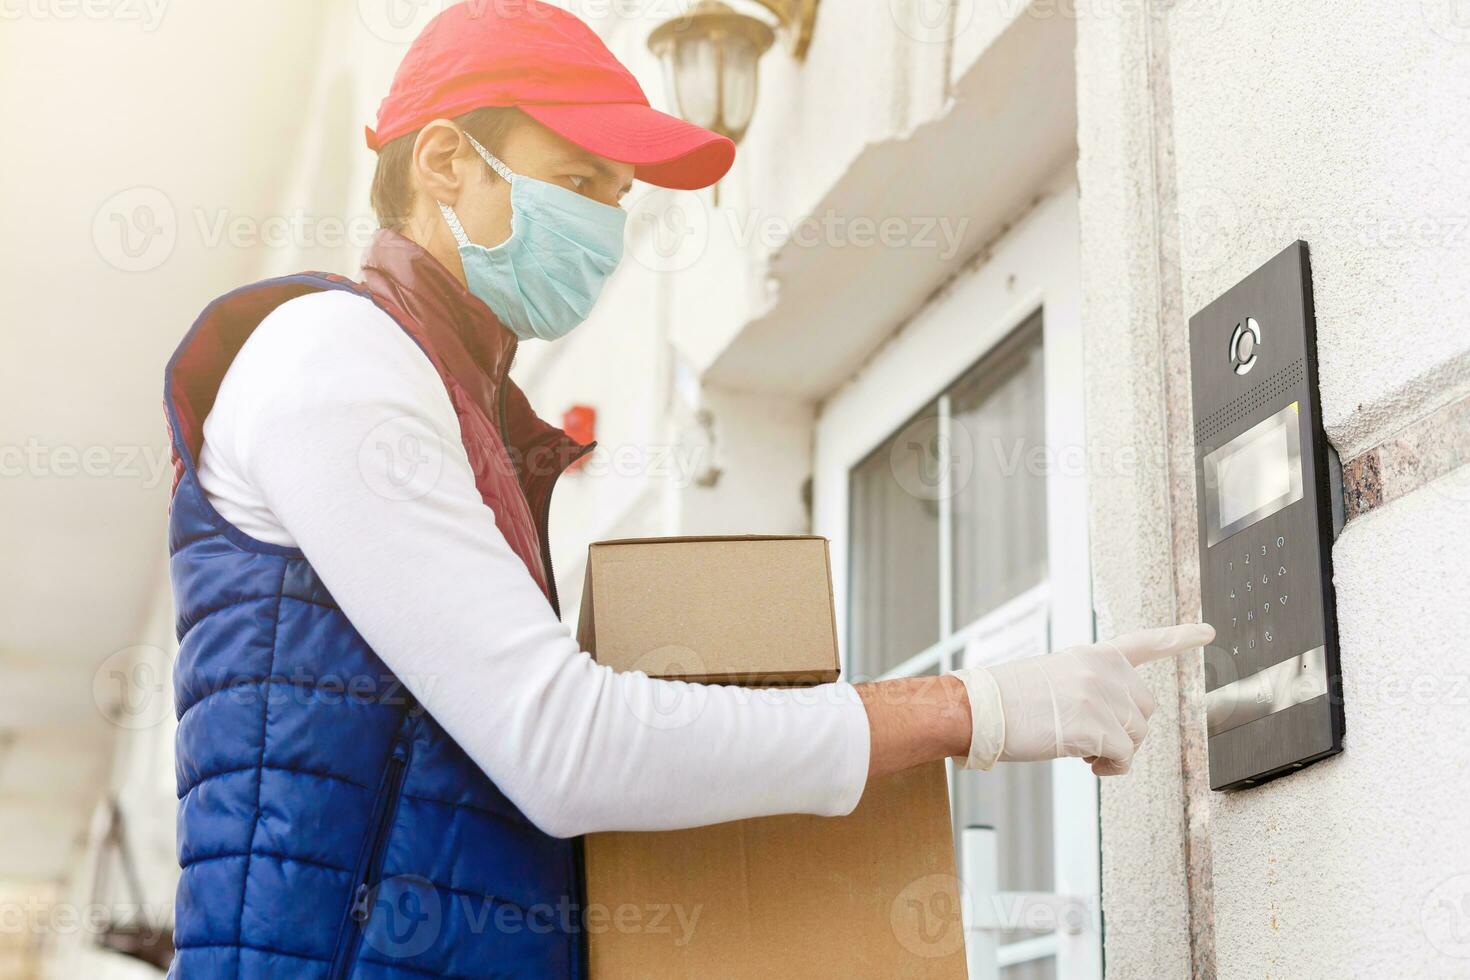 Courier, delivery man in medical latex gloves and mask safely delivers online purchases in white box to the door during the coronavirus epidemic, COVID-19. Stay home, safe concept. photo